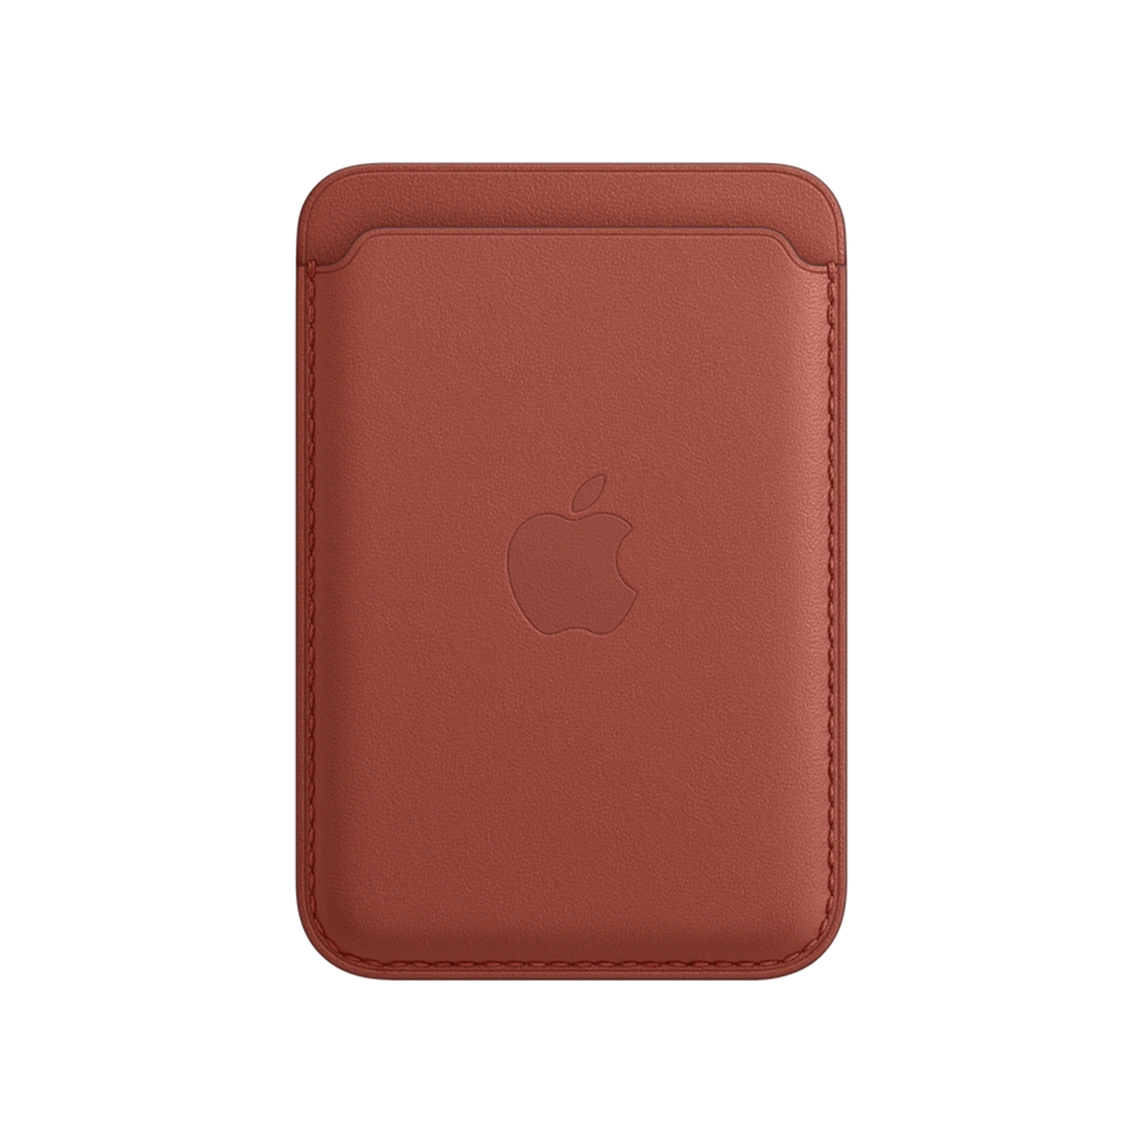 Apple iPhone Leather Wallet with MagSafe